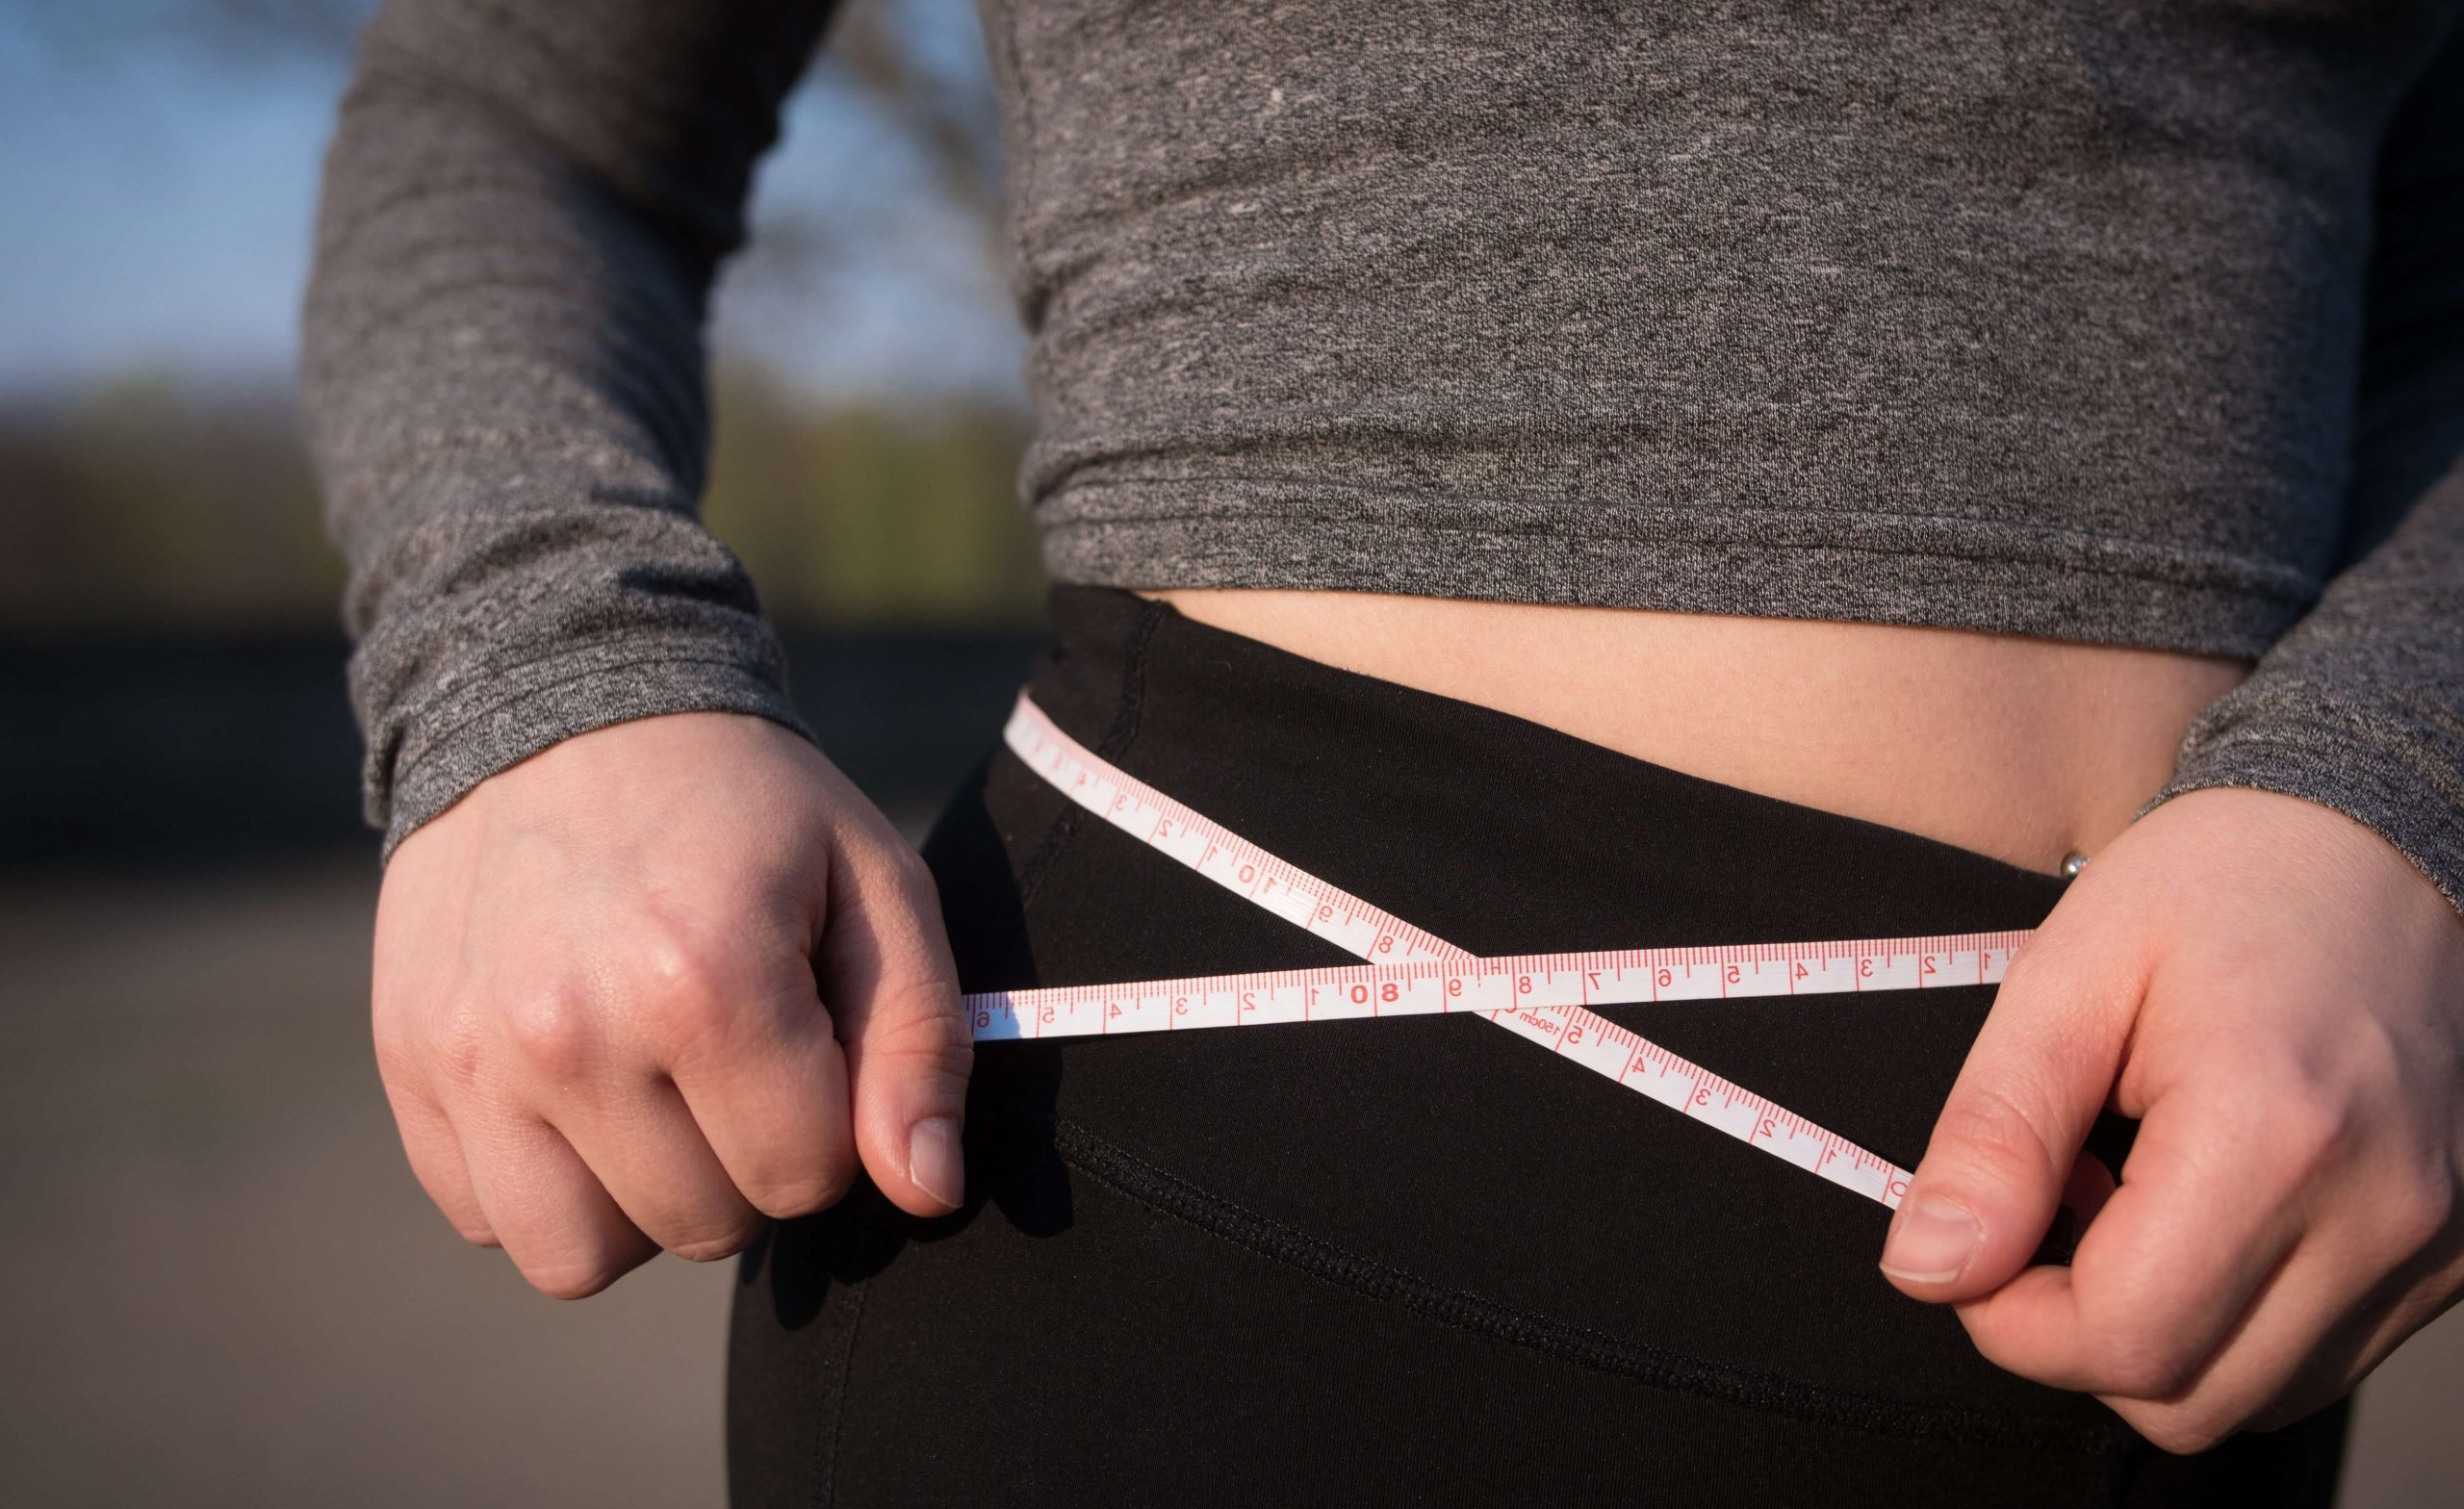 The Many Benefits Of Medically-Supervised Weight Loss Programs